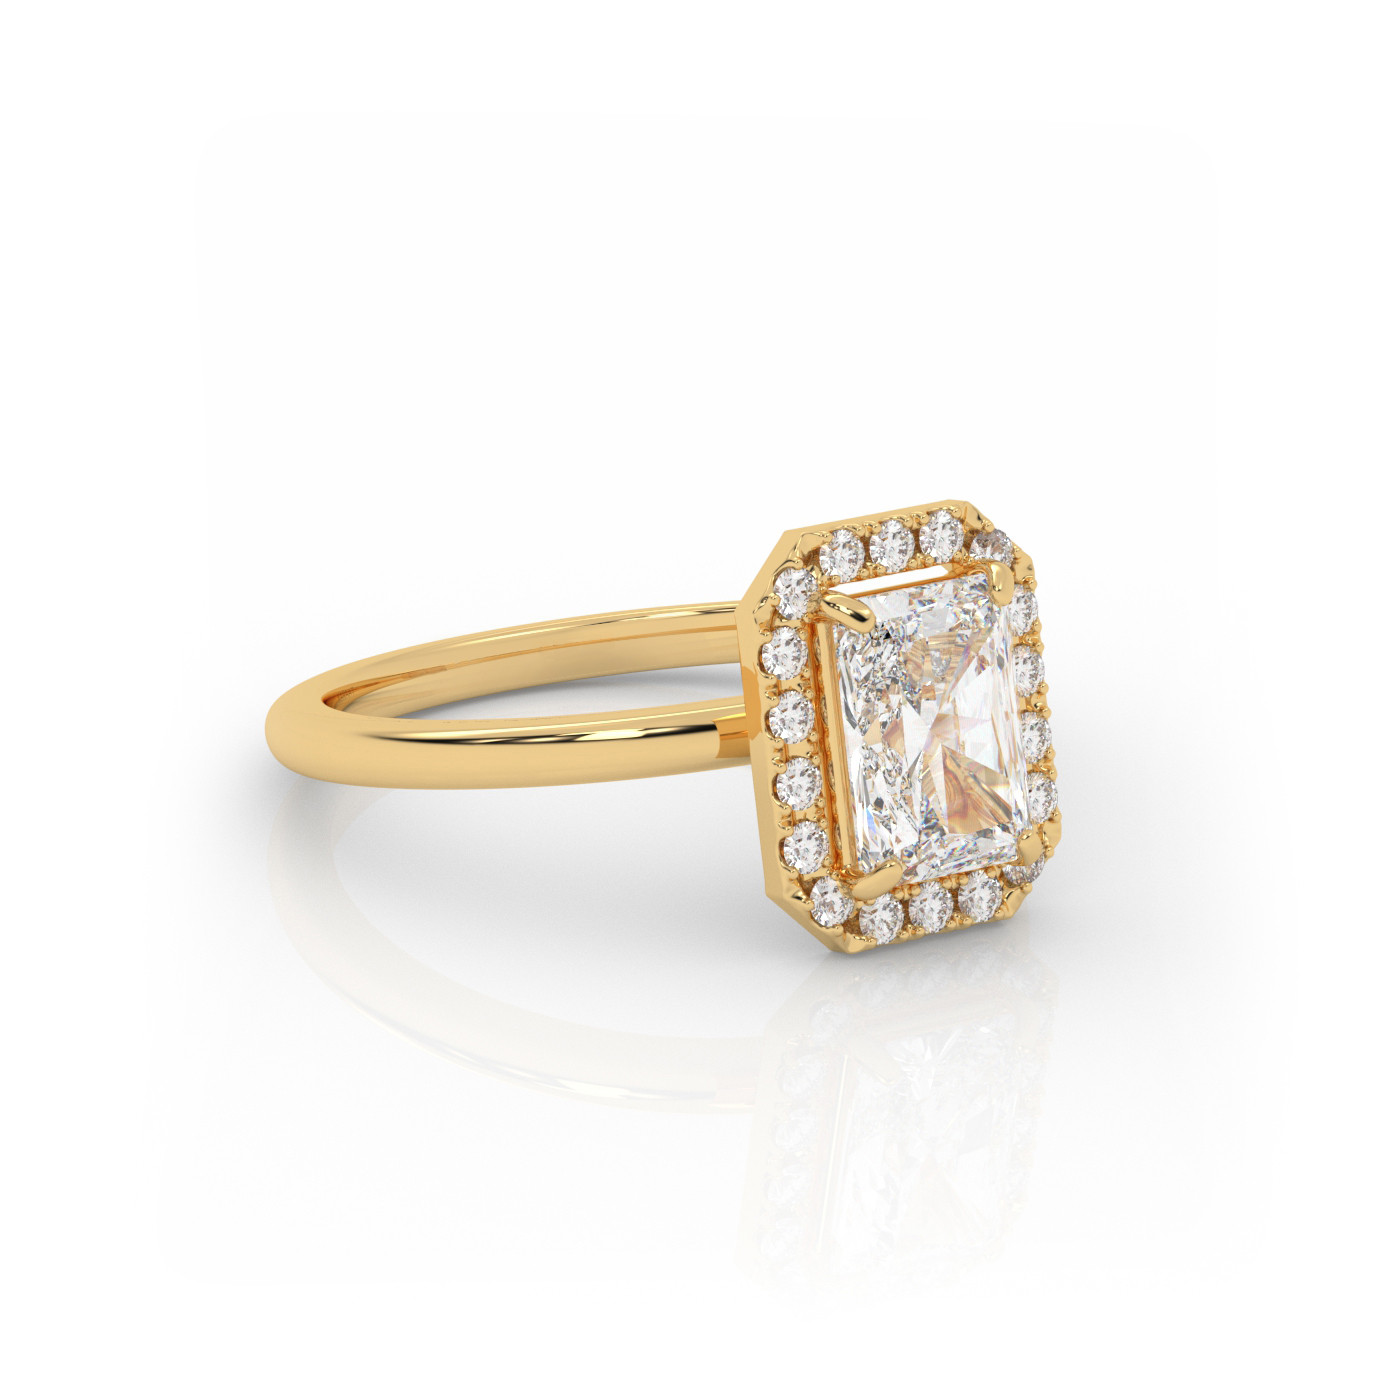 18K YELLOW GOLD Radiant Diamond Cut Engagement Ring with Halo Style